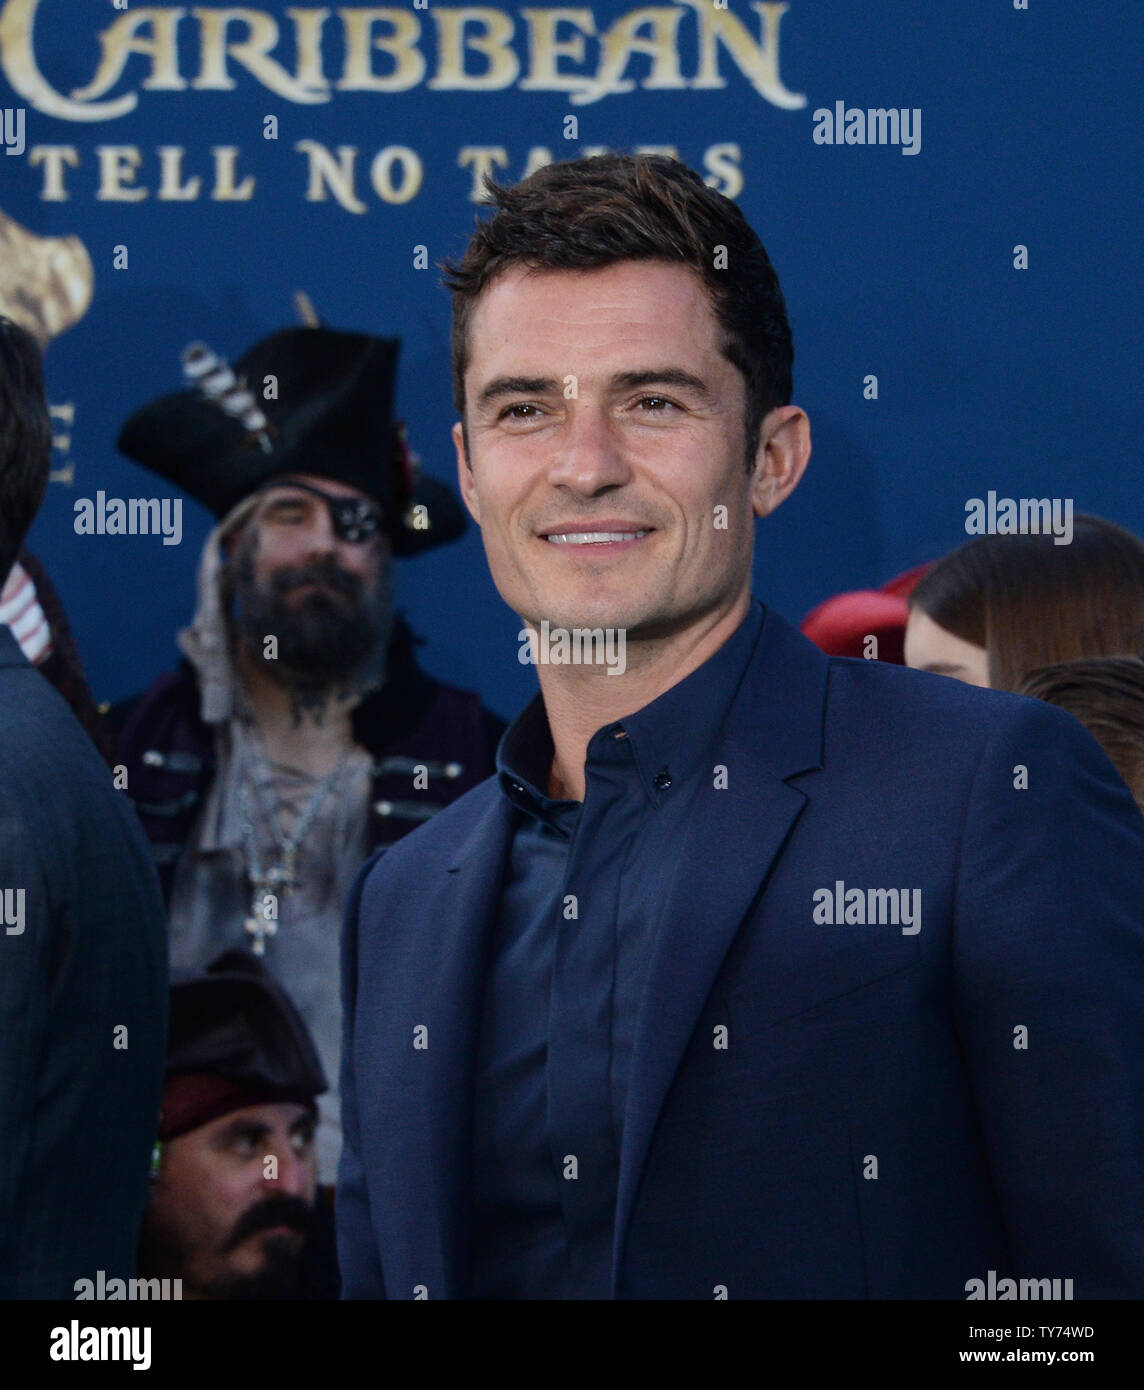 Cast member Orlando Bloom attends the premiere of the premiere of the  motion picture fantasy "Pirates of the Caribbean: Dead Men Tell No Tales"  at the Dolby Theatre in the Hollywood section